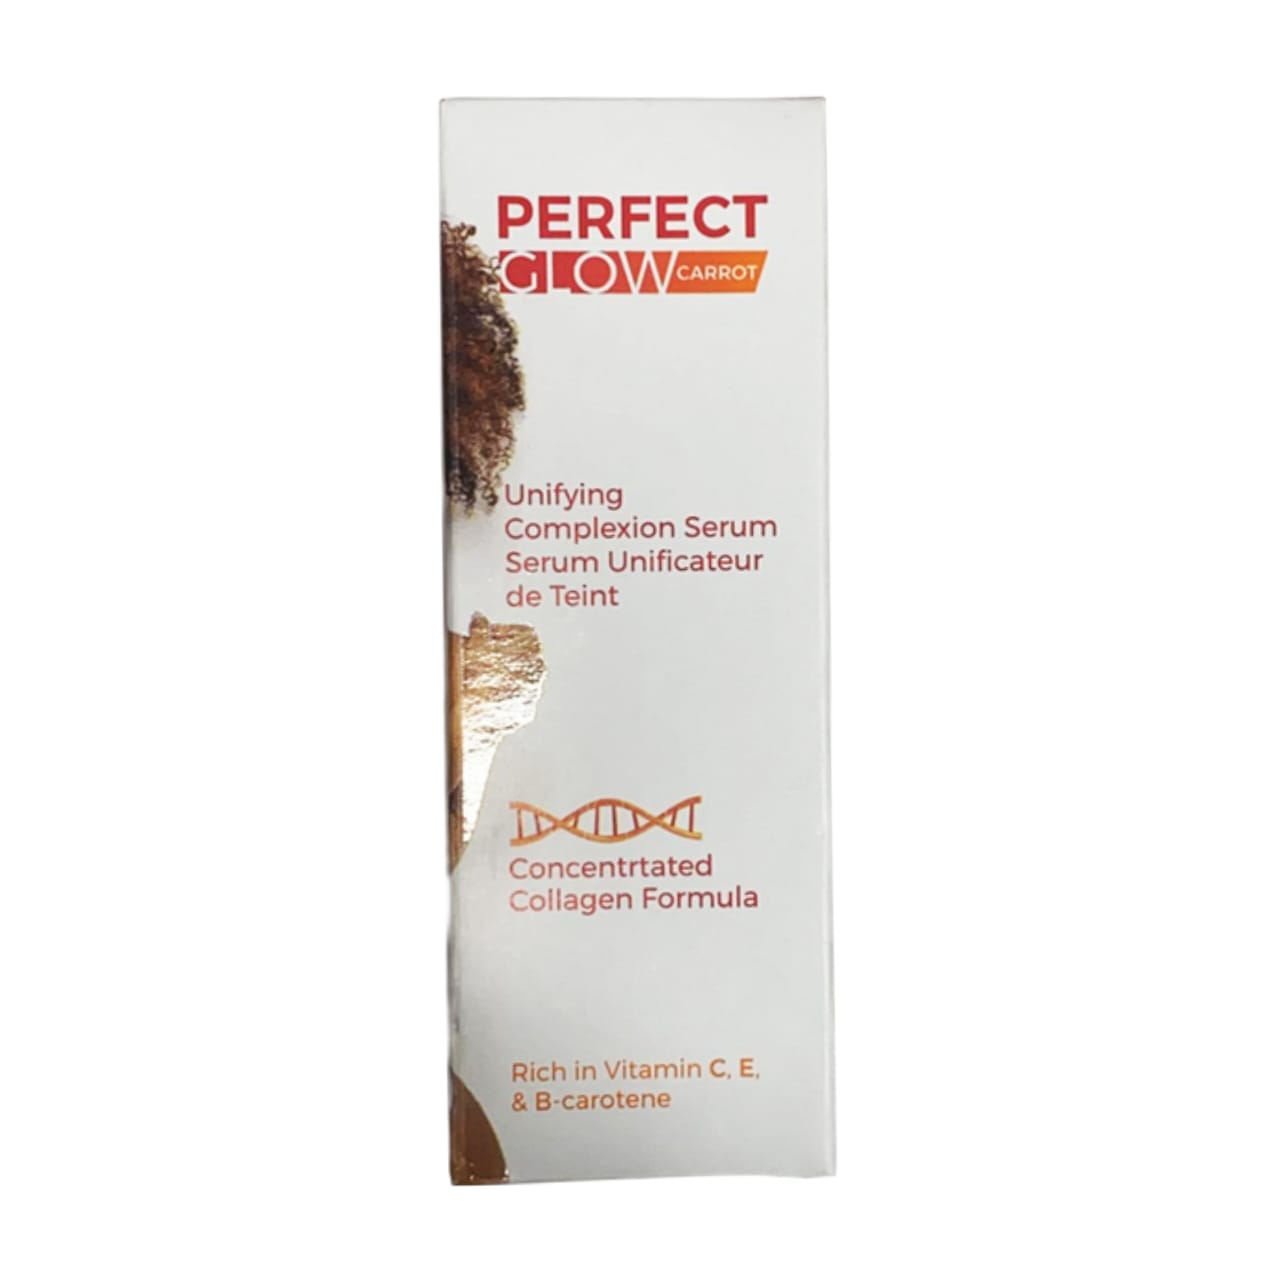 Perfect Glow Carrot Unifying Complexion Serum